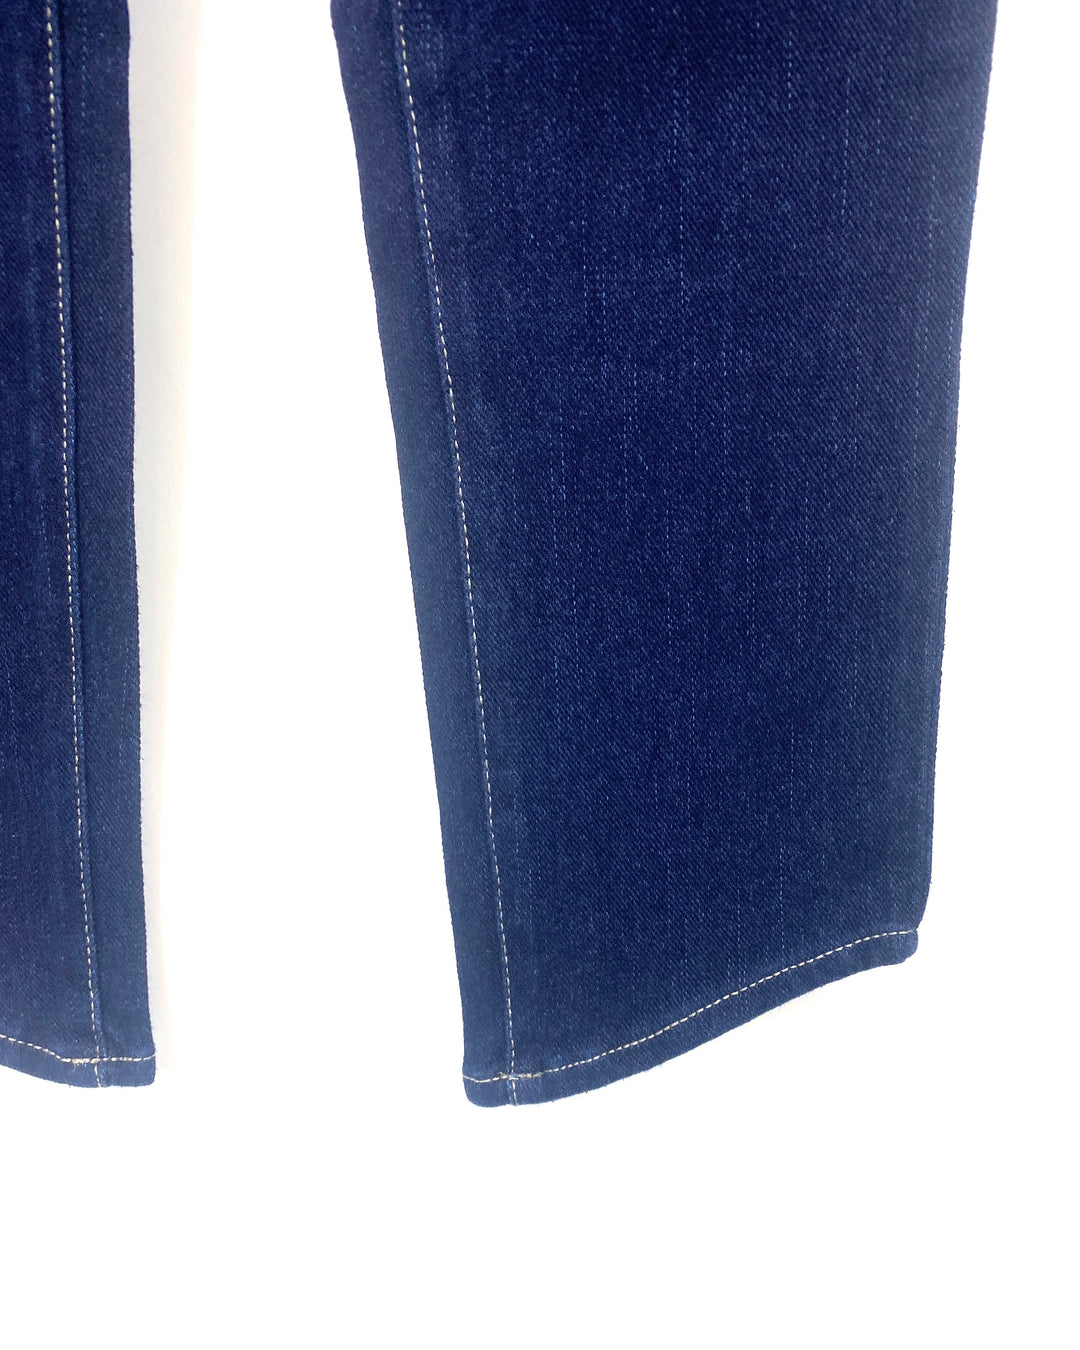 Dark Blue Wash Jeans With Slanted Ends   - Size 6/8